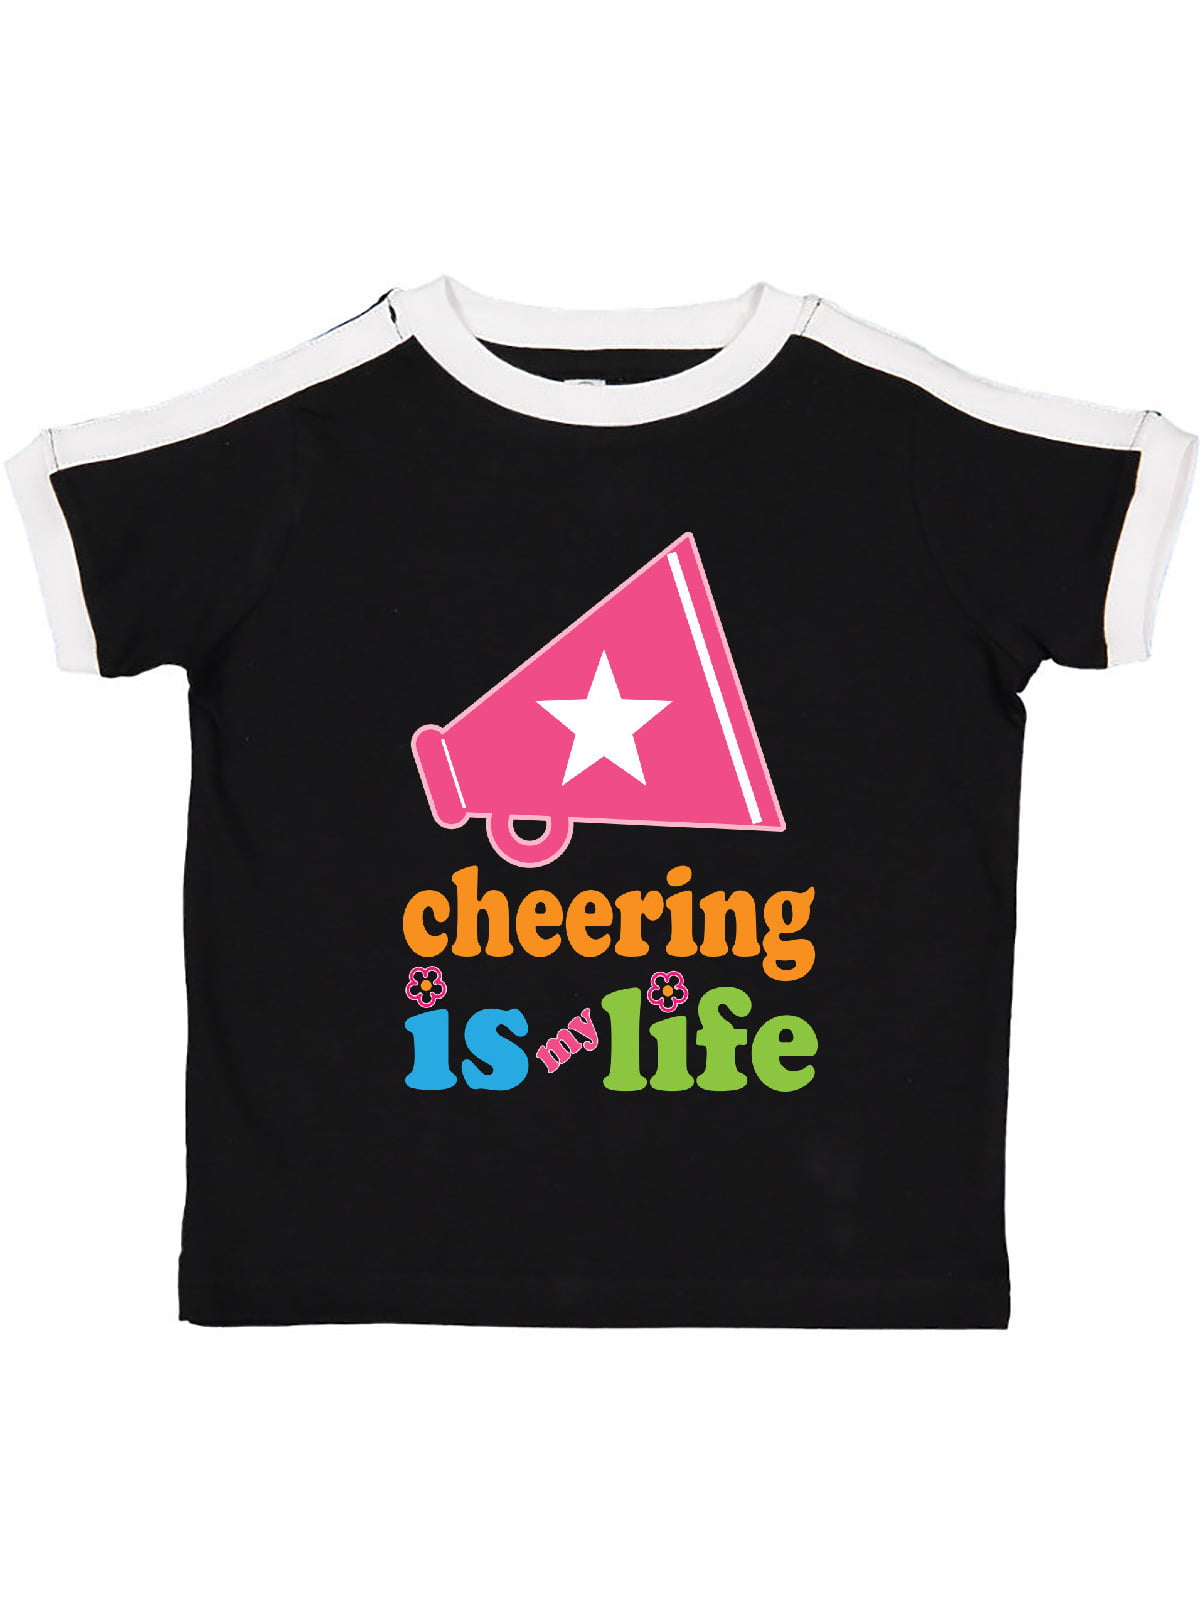 Cheer Girls T Shirt Infant Toddler Cheerleader Cheerleading squad Kids Personalized Child Childrens Clothing Clothes humor top Tshirt gift